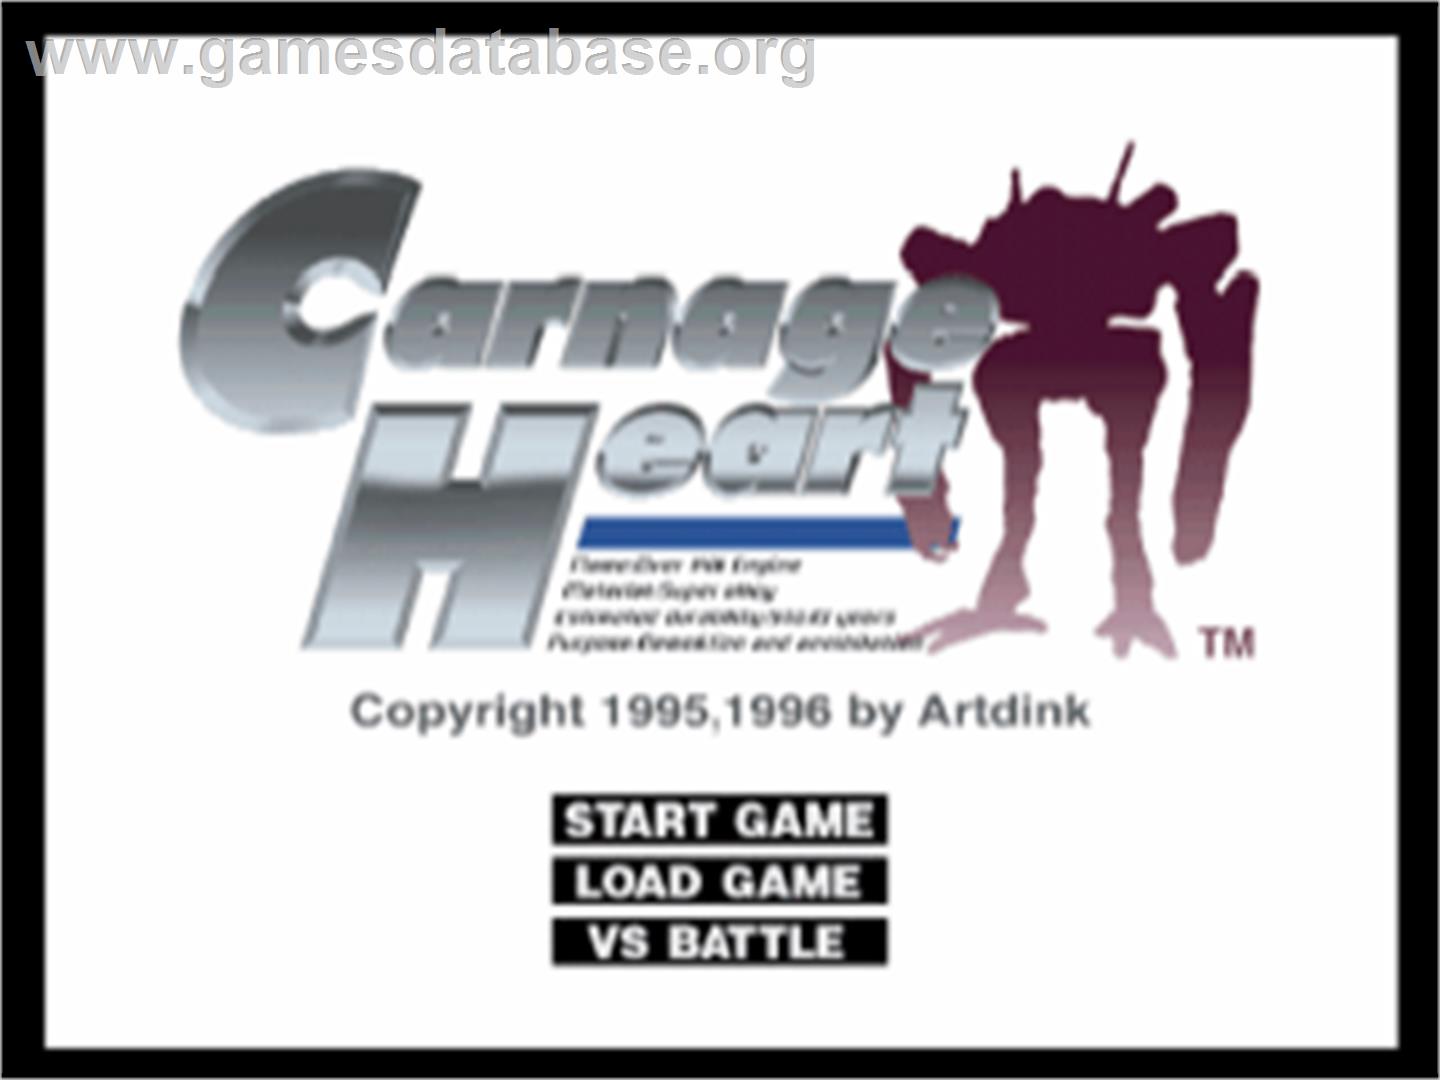 Carnage Heart - Sony Playstation - Artwork - Title Screen